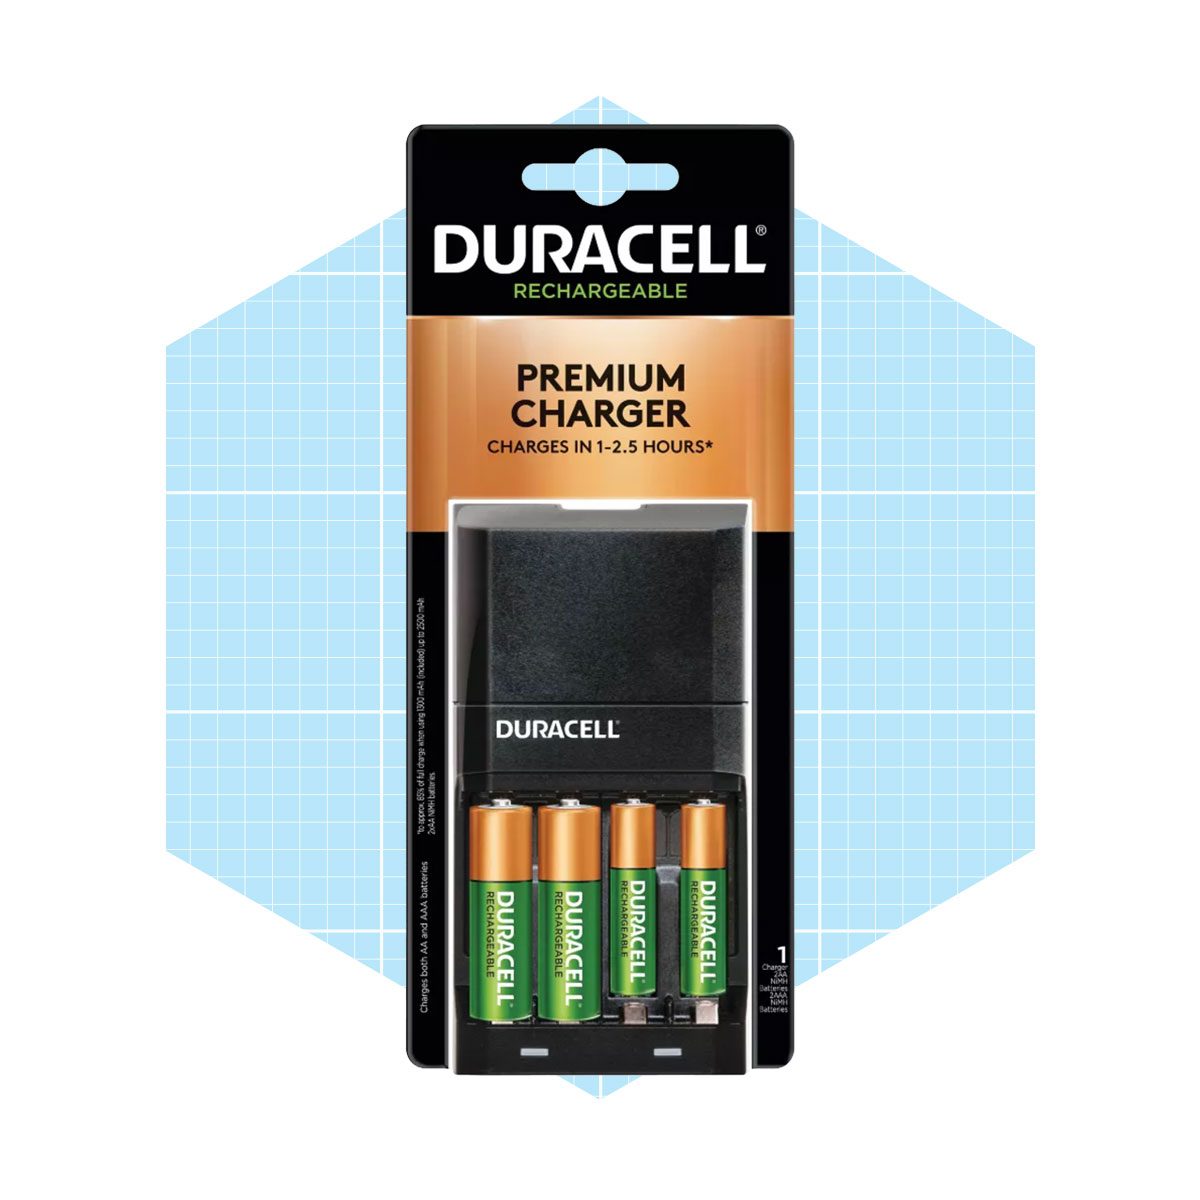 Basics 16-Pack AA Rechargeable Batteries, Recharge up to